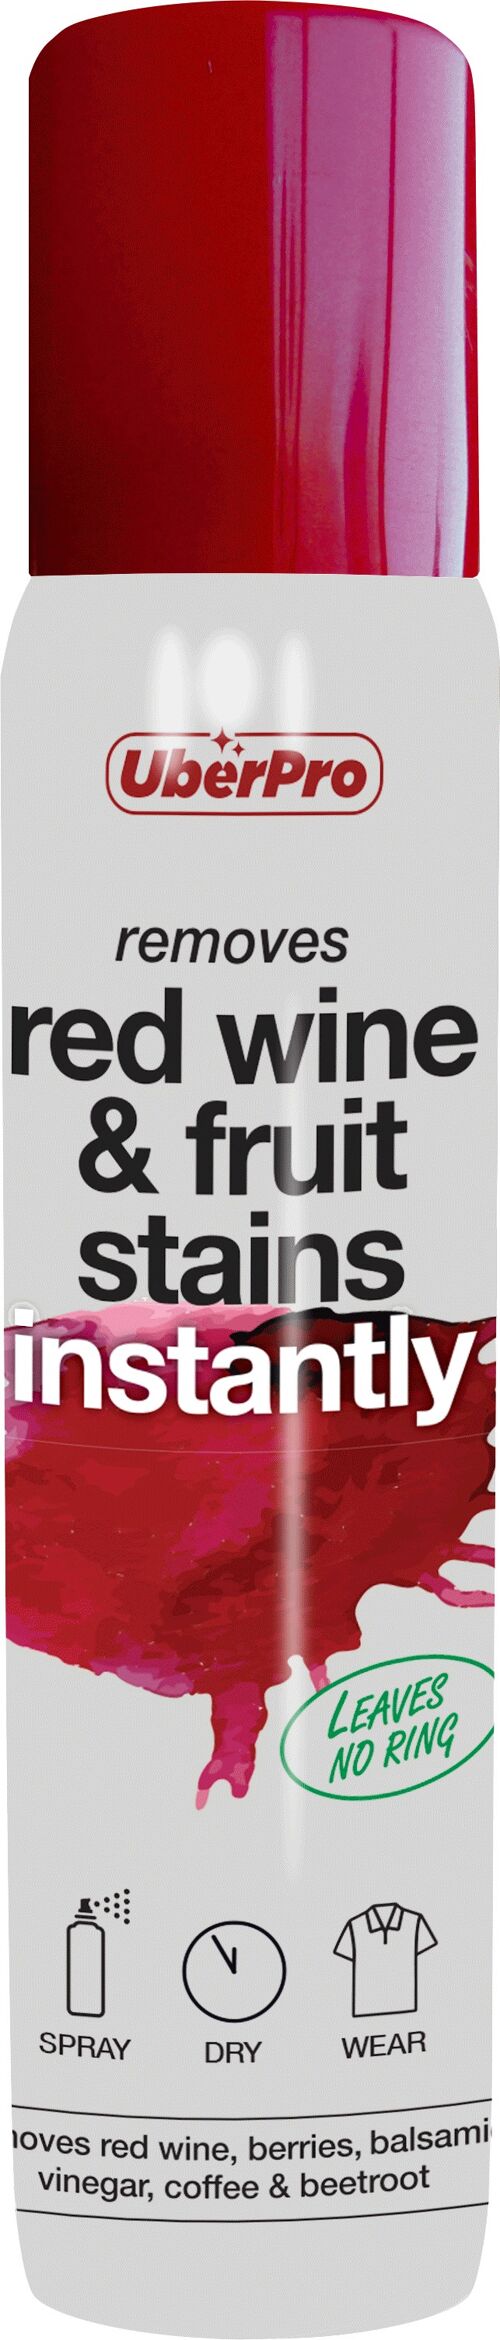 Red wine & fruit stain remover 1200 units